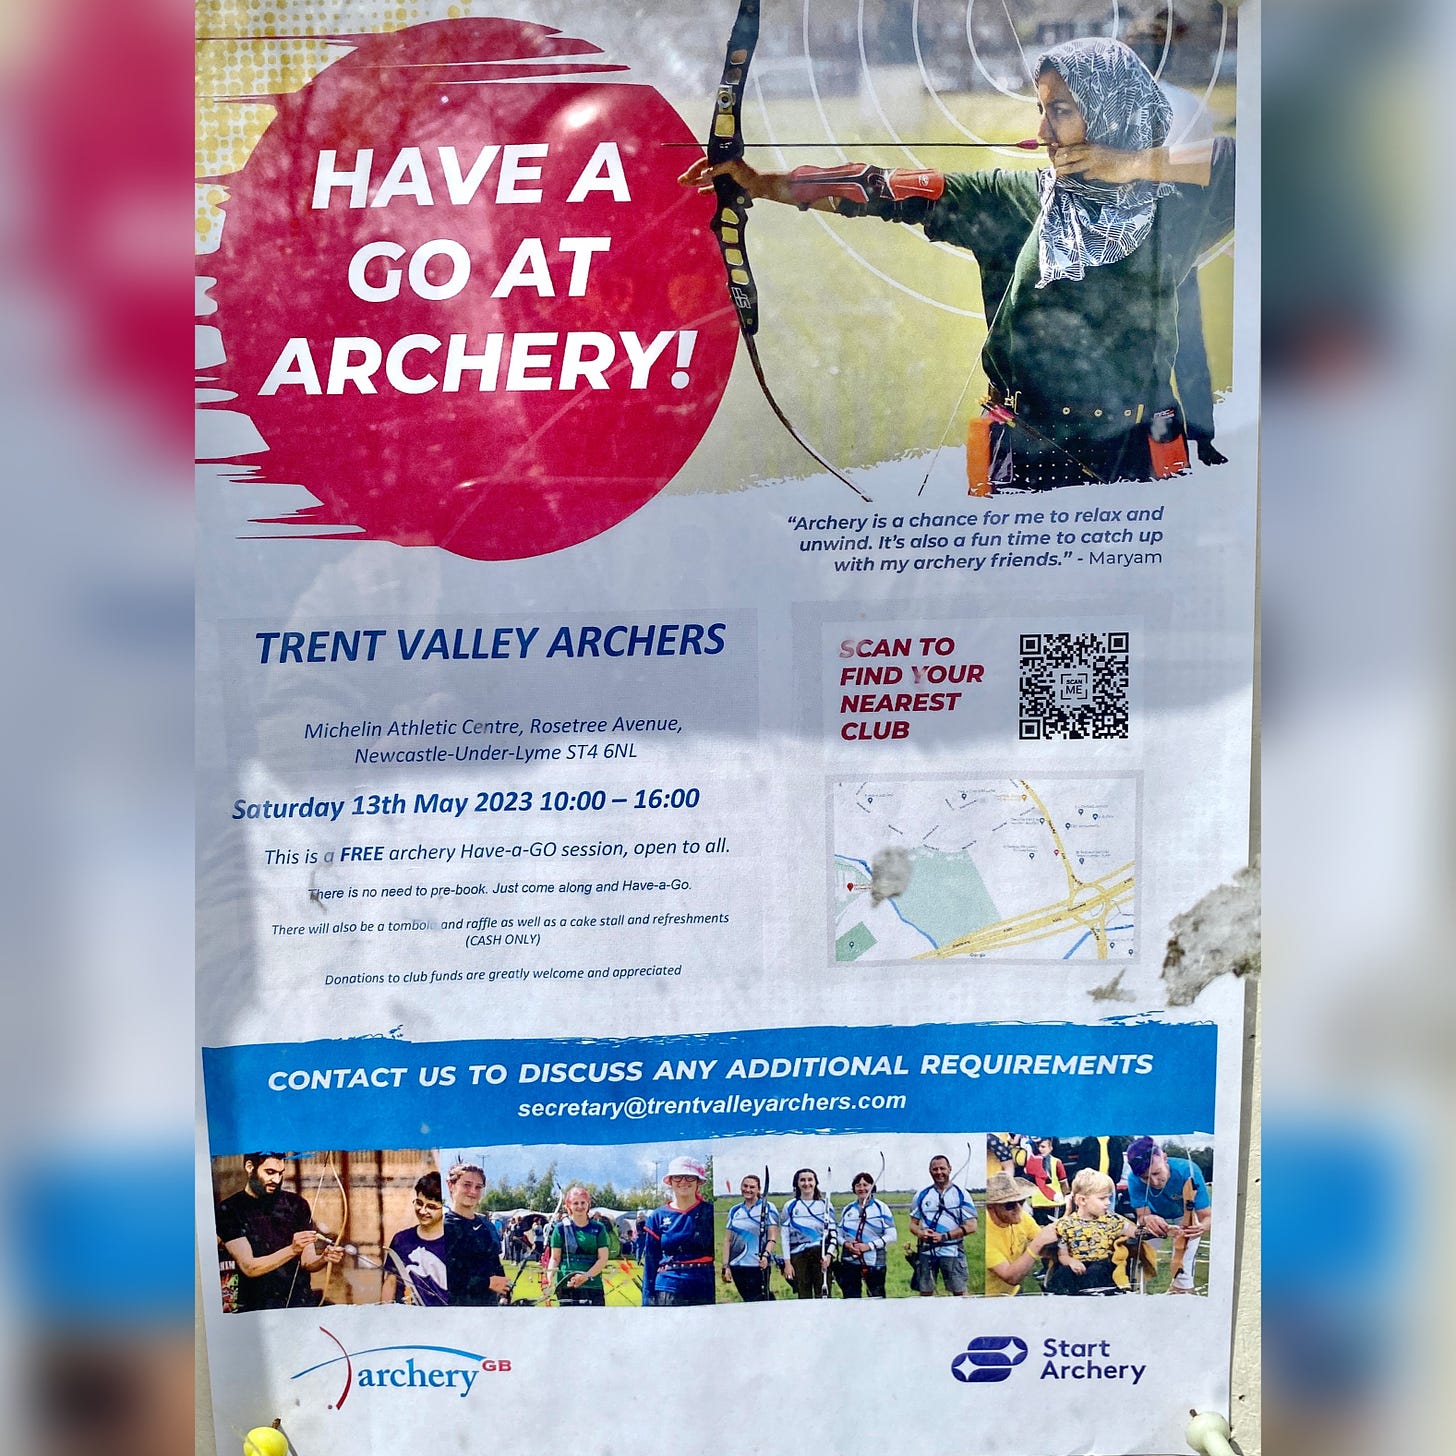 Have a go at archery with Trent Valley Archers